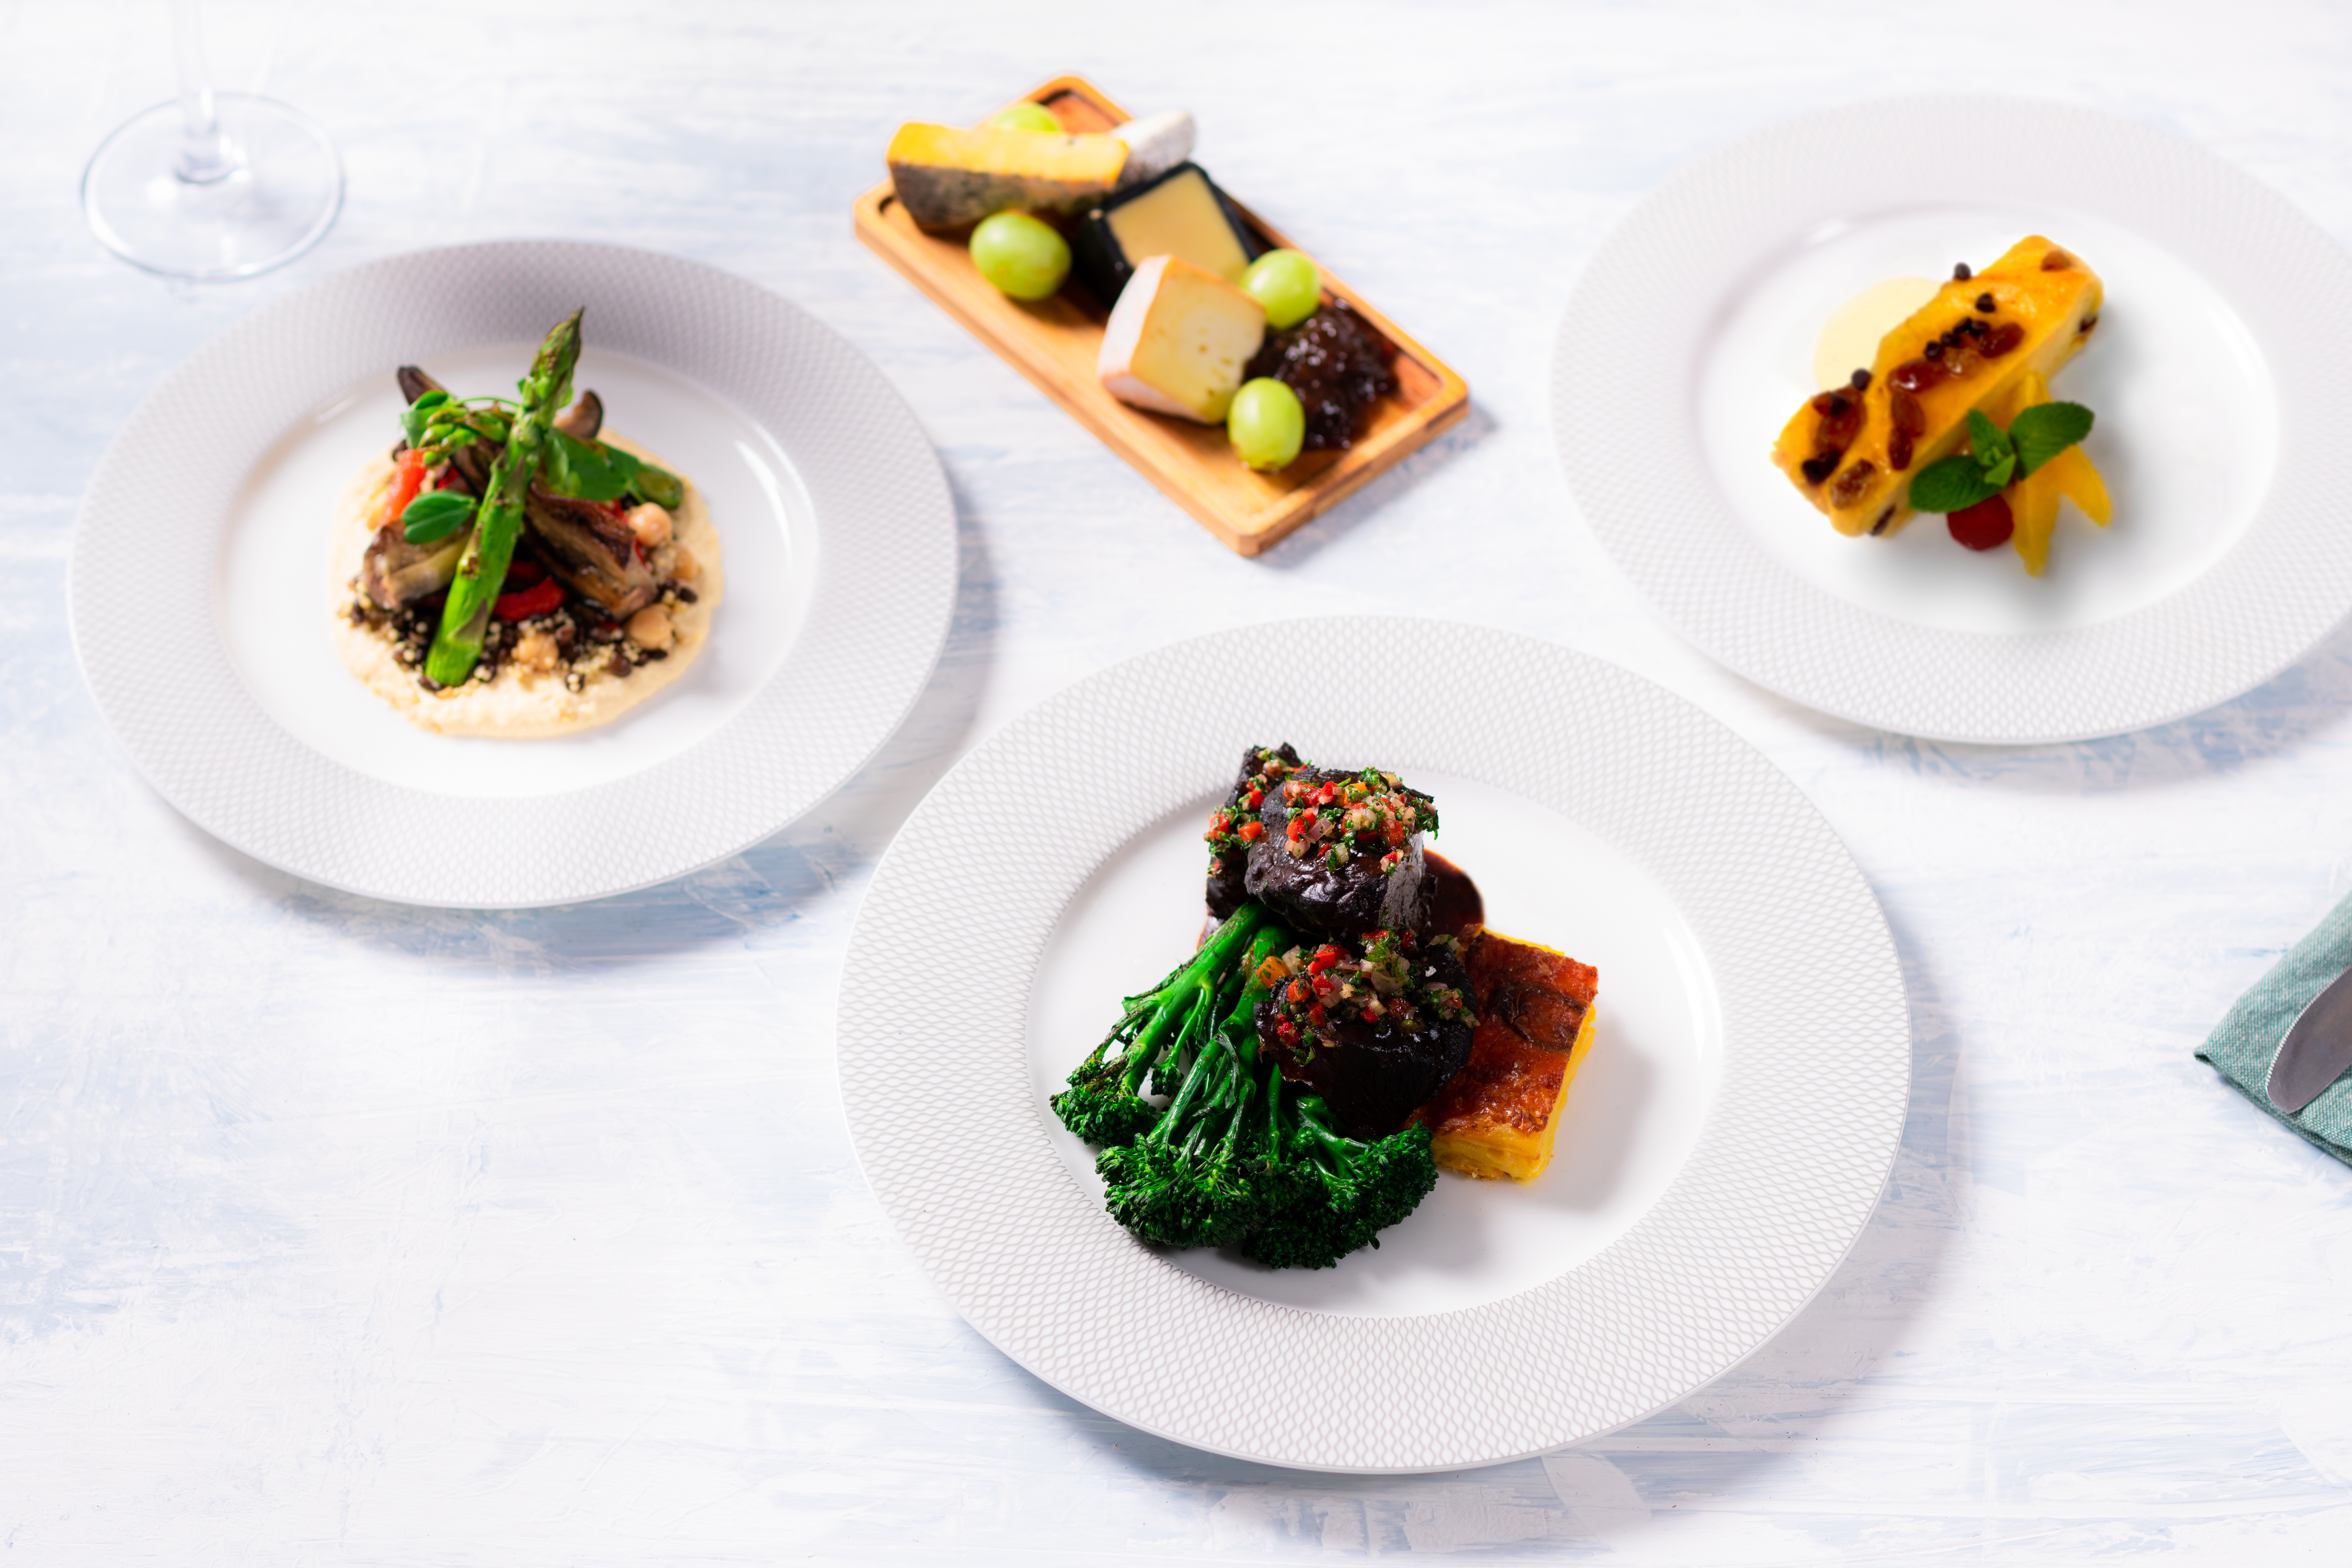 British Airways first class meal kits